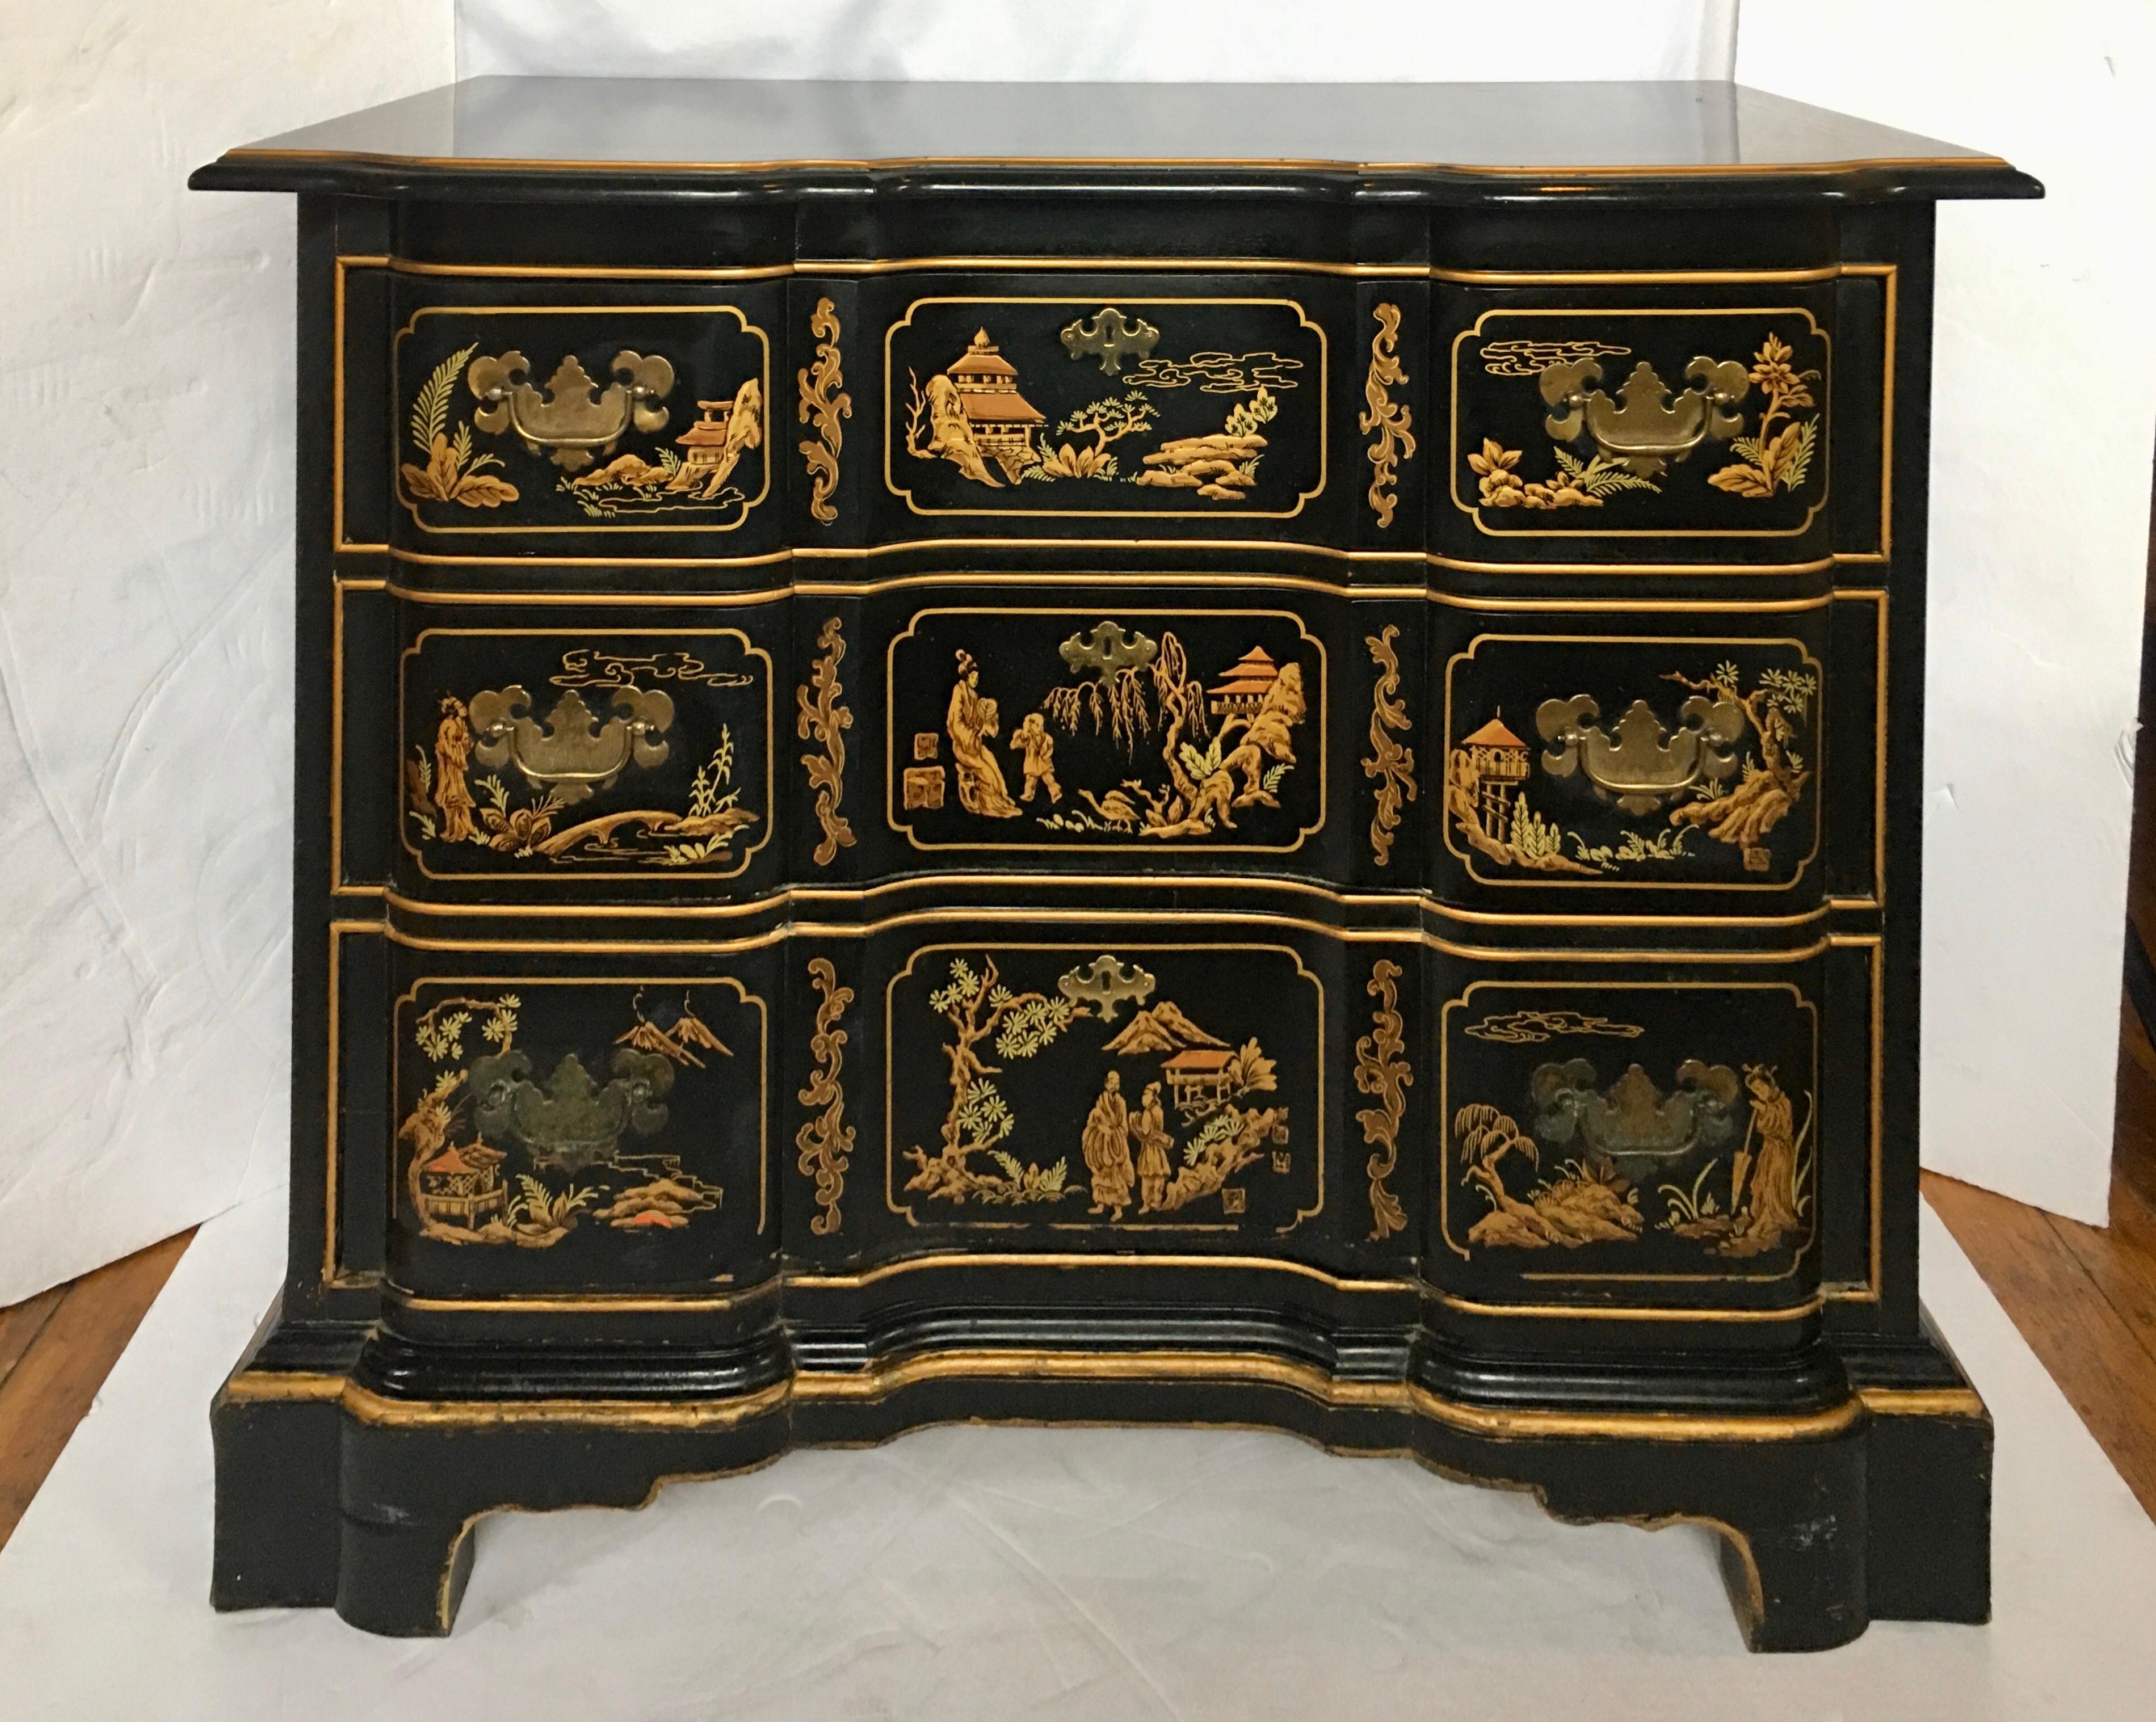 Chinoiserie style three-drawer chest and mirror set with black with gold painted accents by Drexel Et Cetera collection. Three dovetailed drawer fronts feature detailed painted scenes of figures, landscapes, pagodas, and architectural elements with